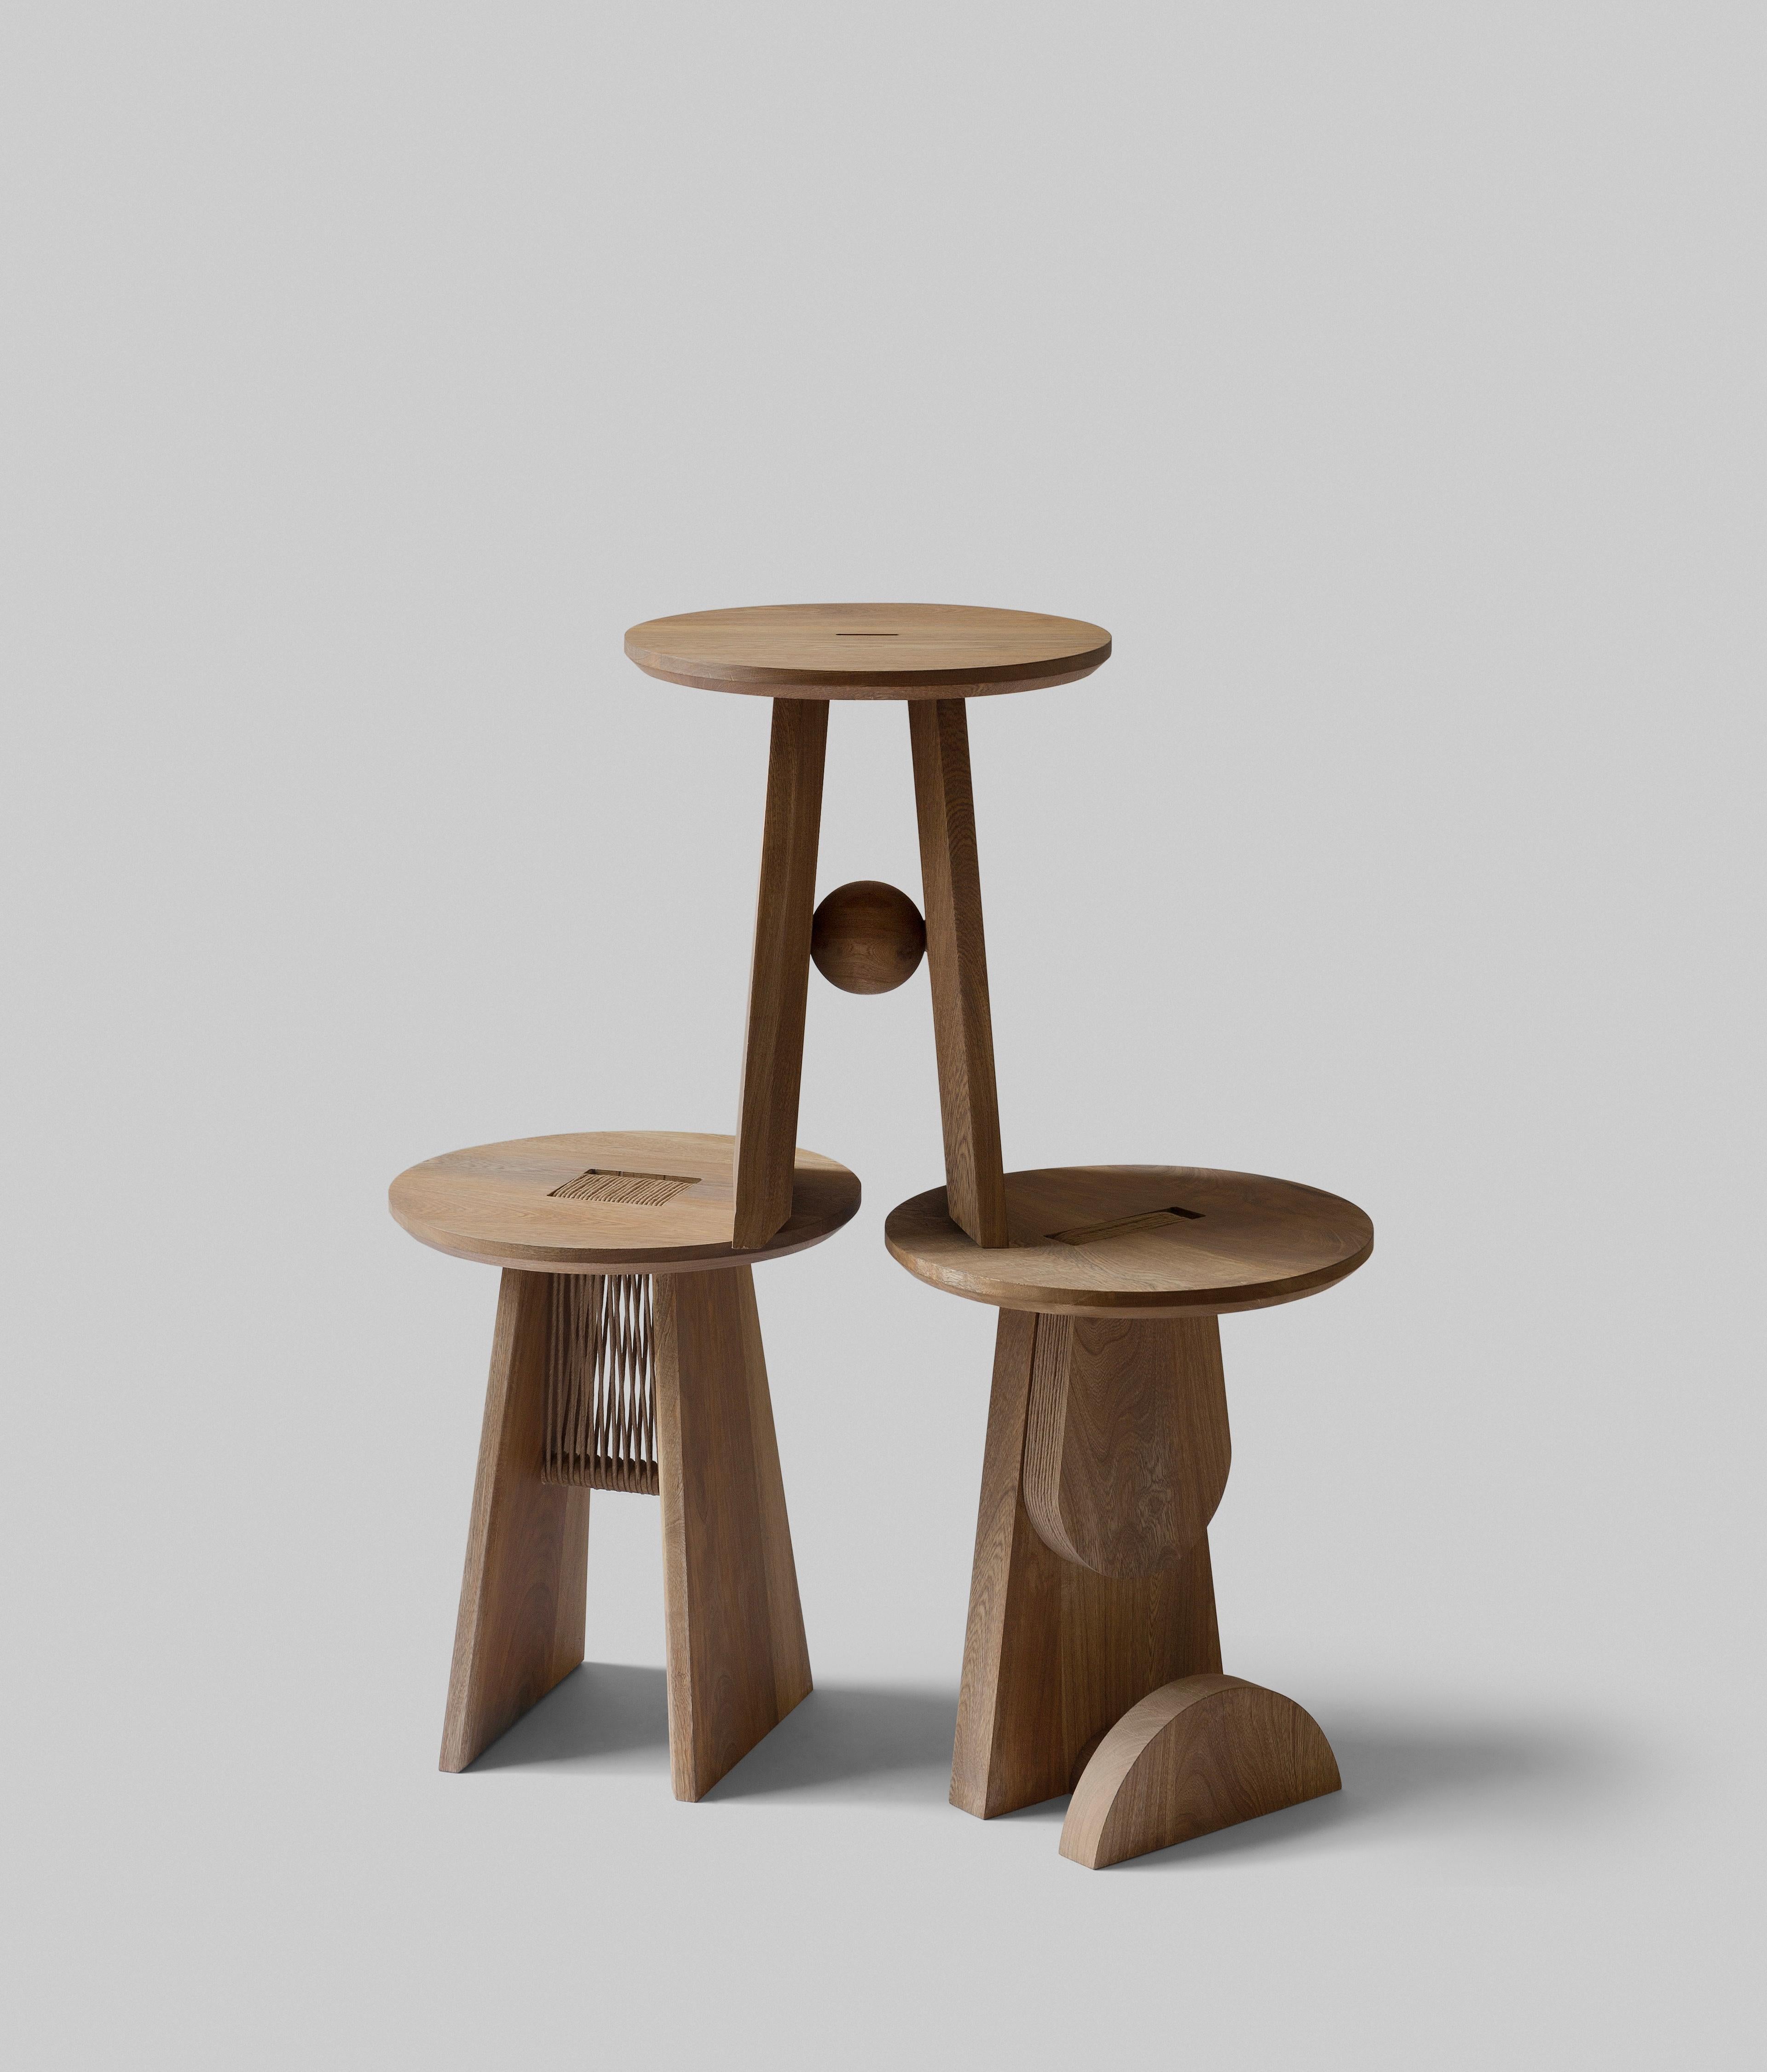 Hand-Crafted Basurto 02 Contemporary Wooden Stool with Leather Details For Sale